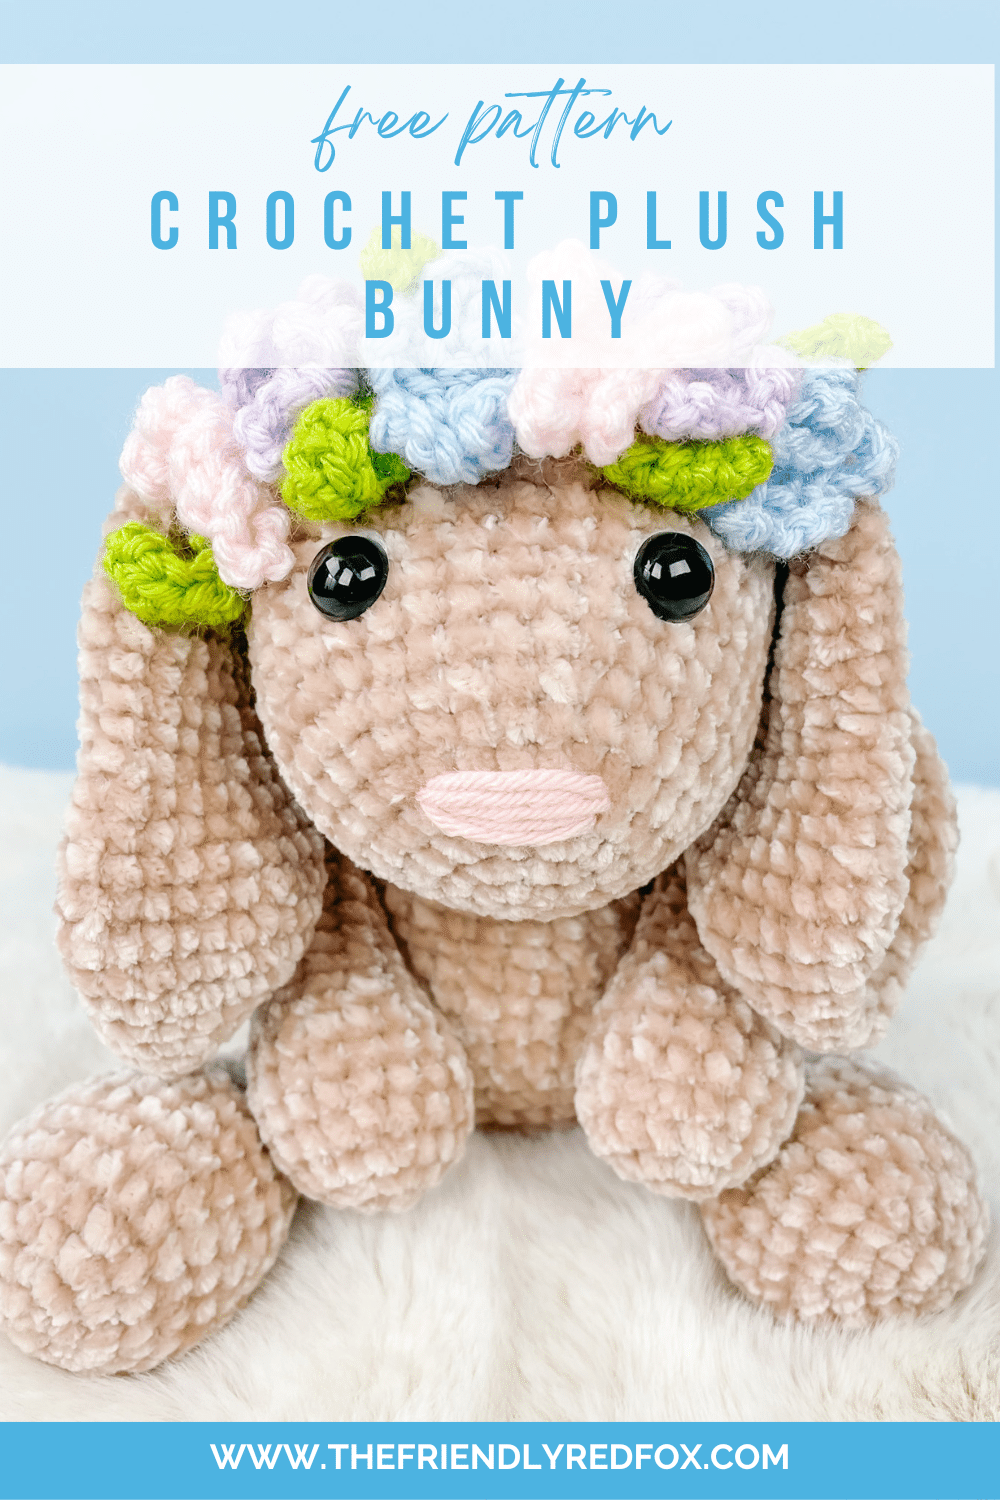 This sweet free crochet bunny rabbit pattern is so perfect to make for Easter (or any time really!) I love the floppy little ears and the simple details.